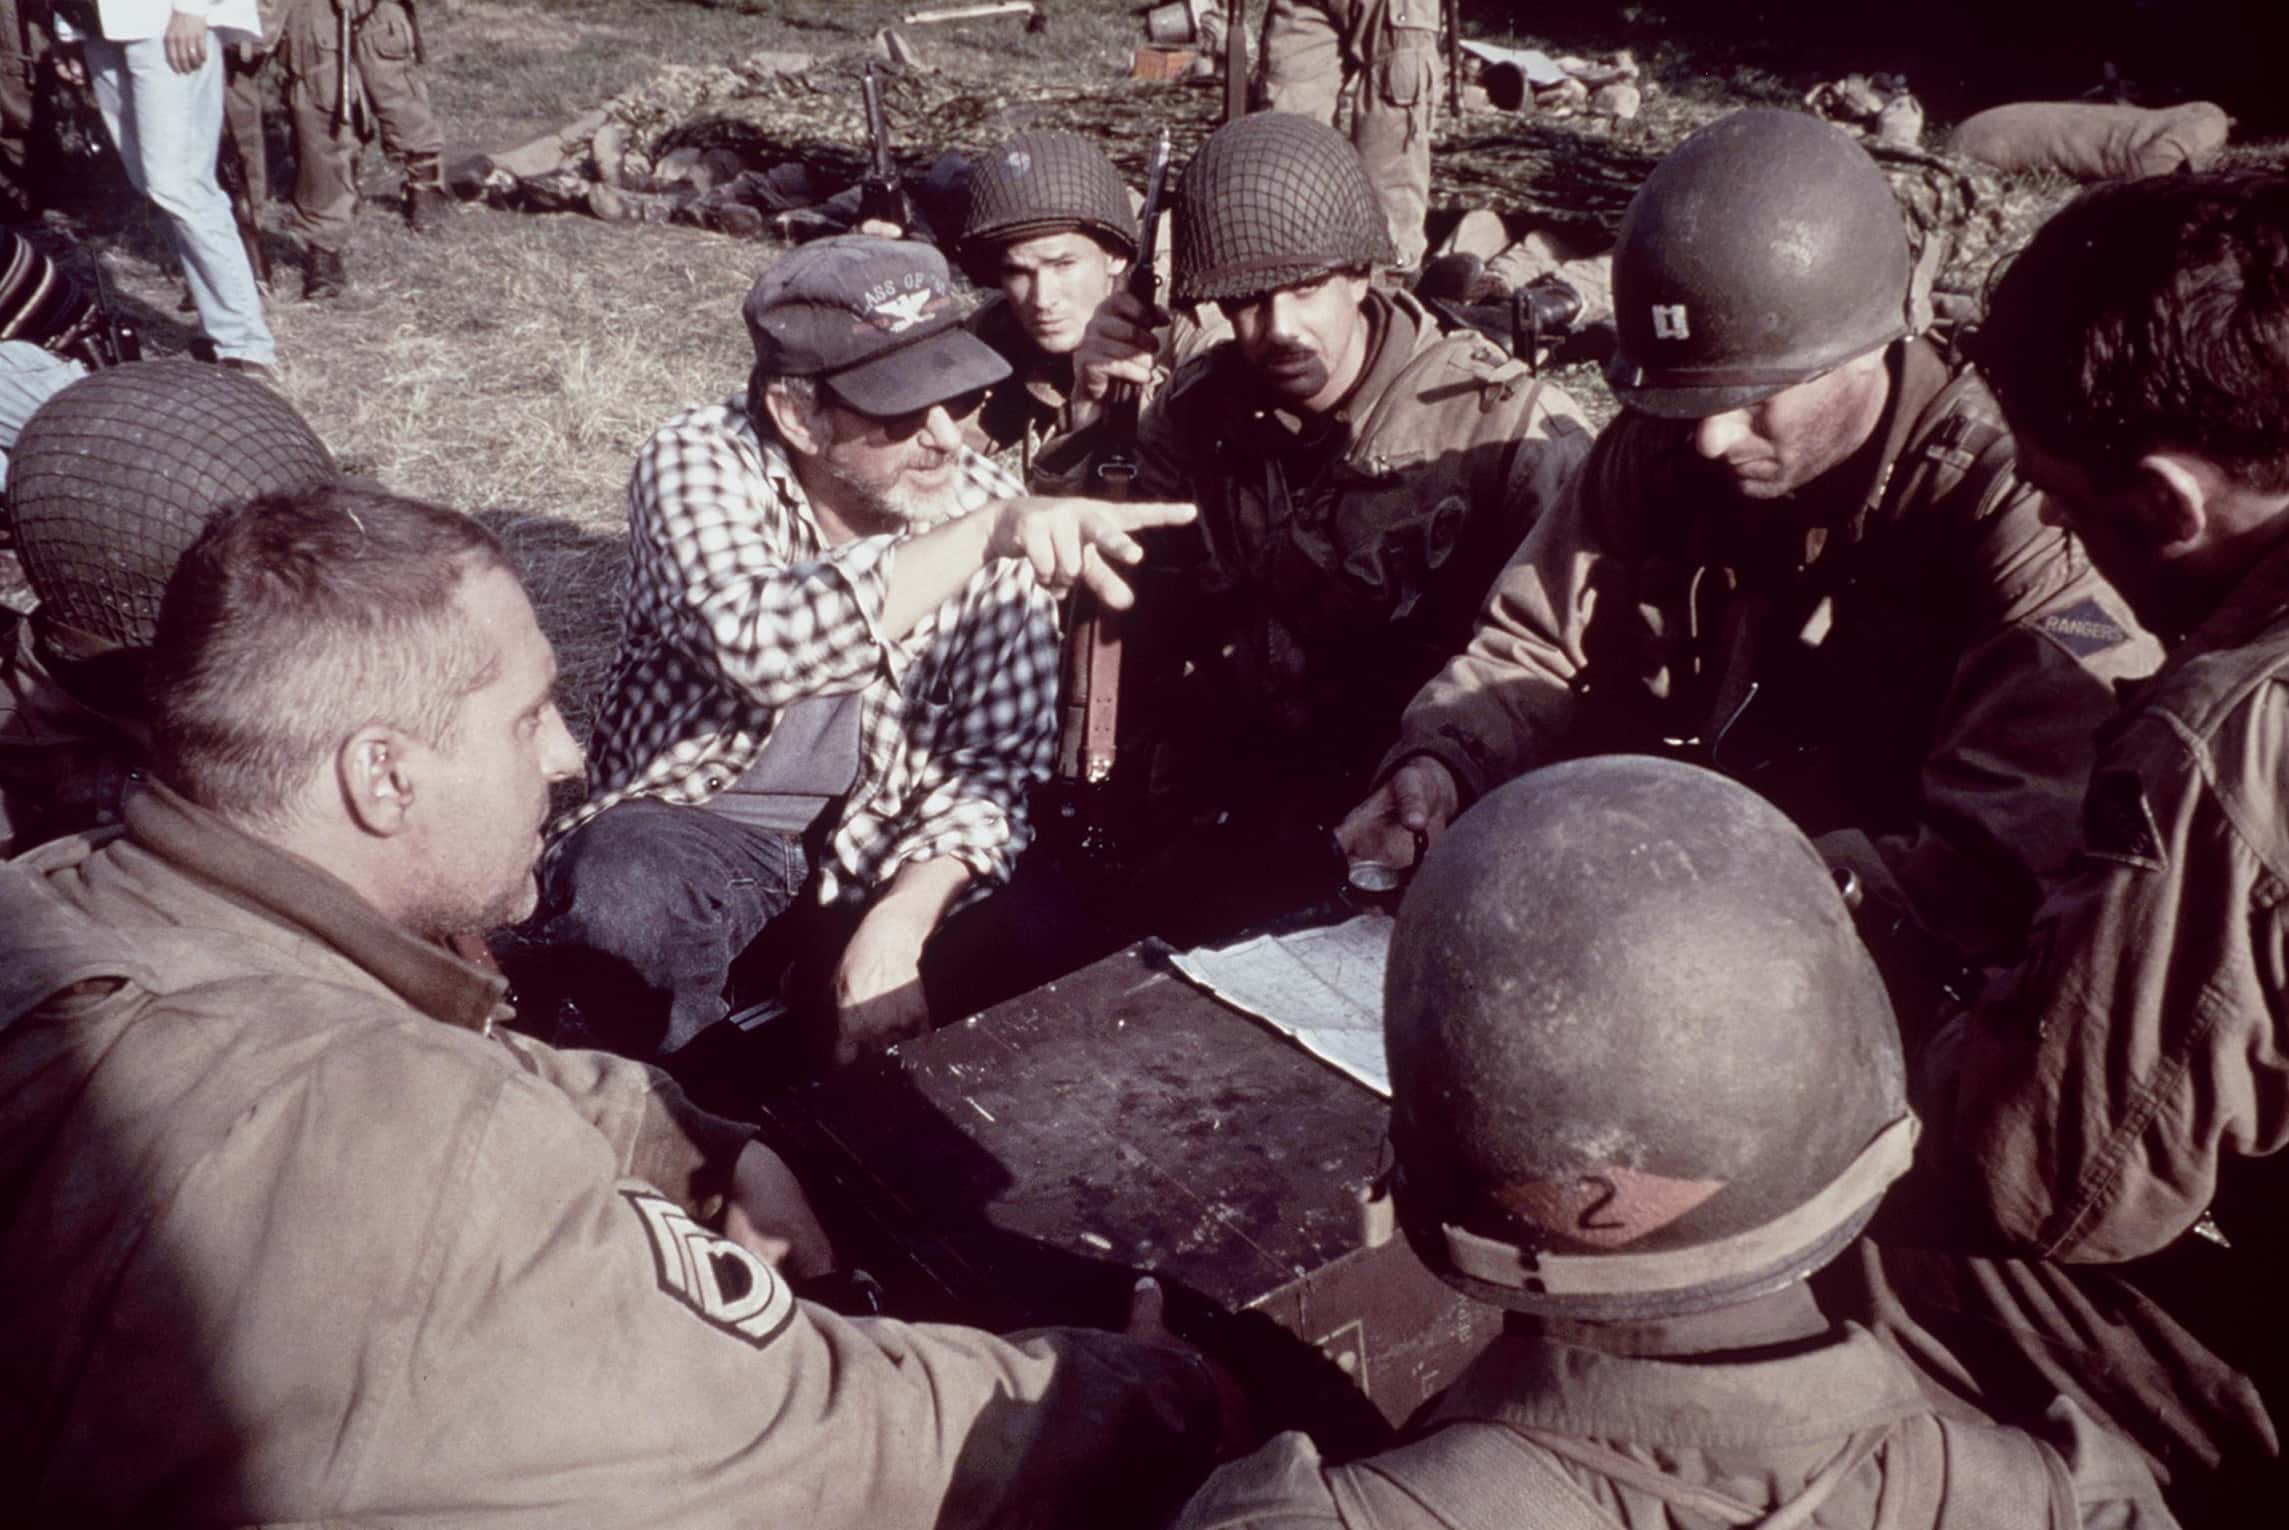 Steven Spielberg Directs Tom Hanks And Crew On The Set Of The WwII Drama 'Saving Private Rayan'.